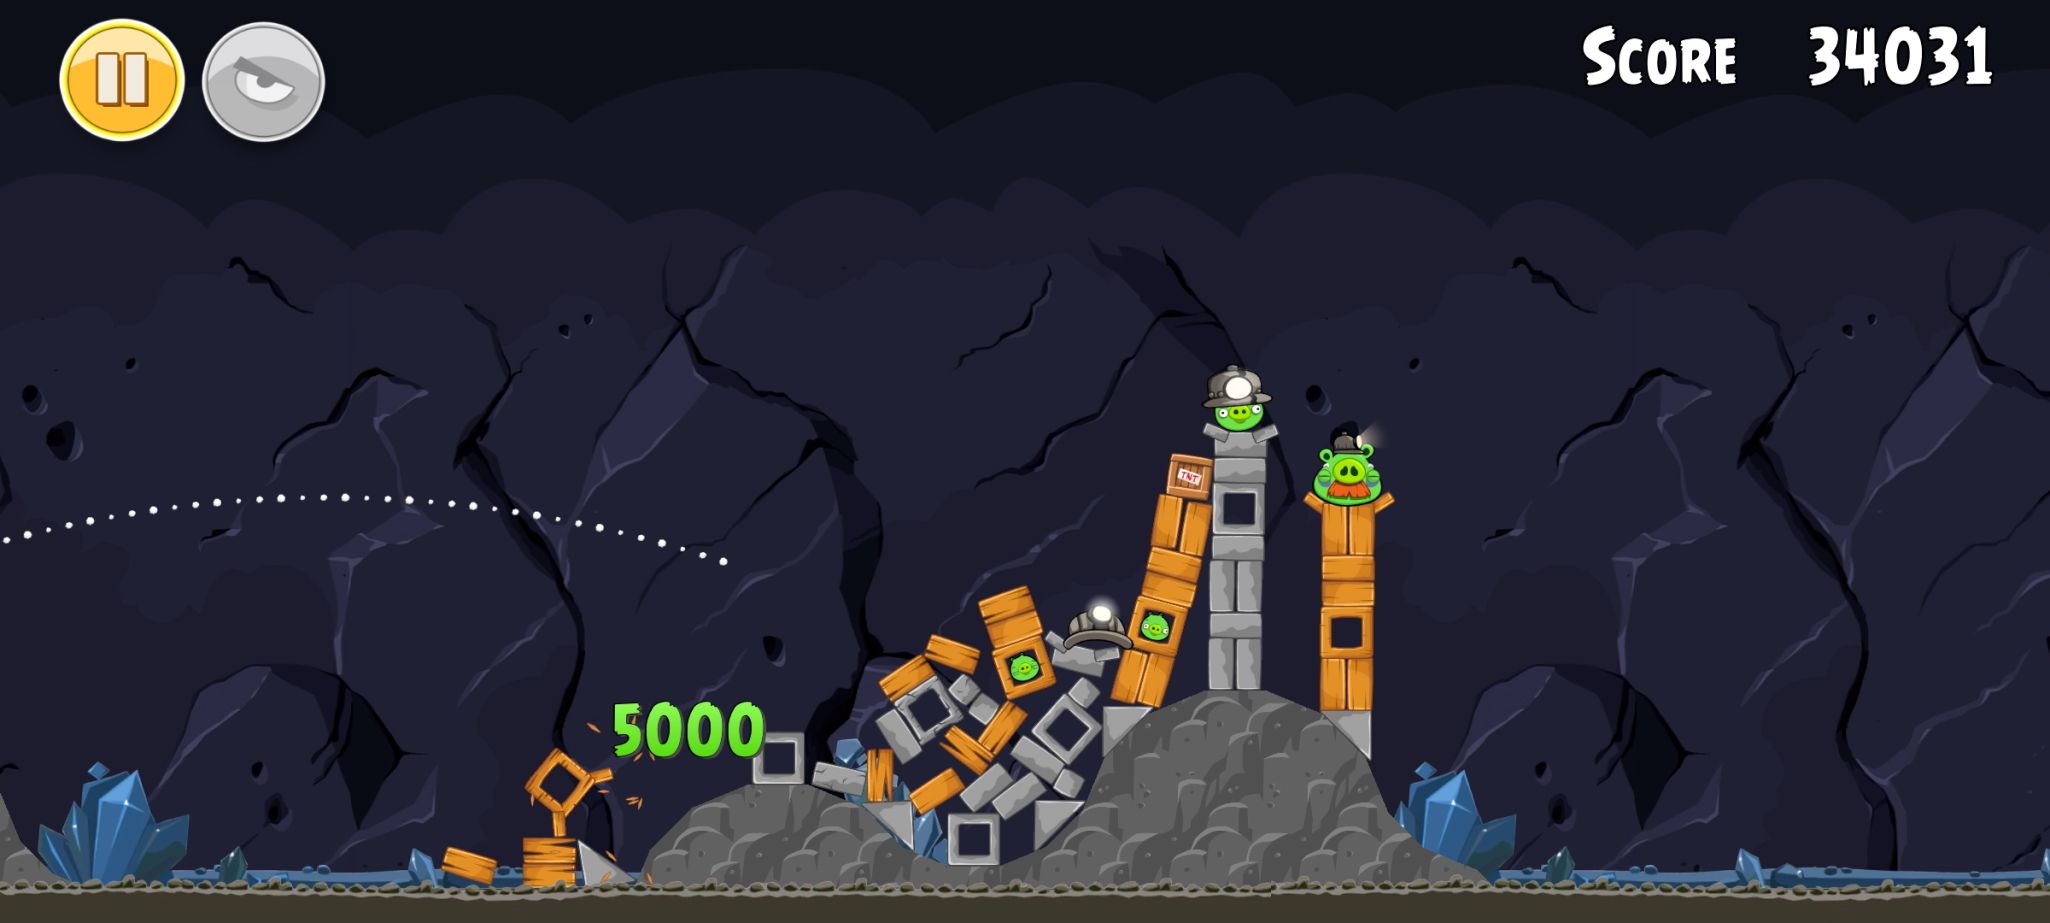 Example of after impact damage in Angry Birds classic